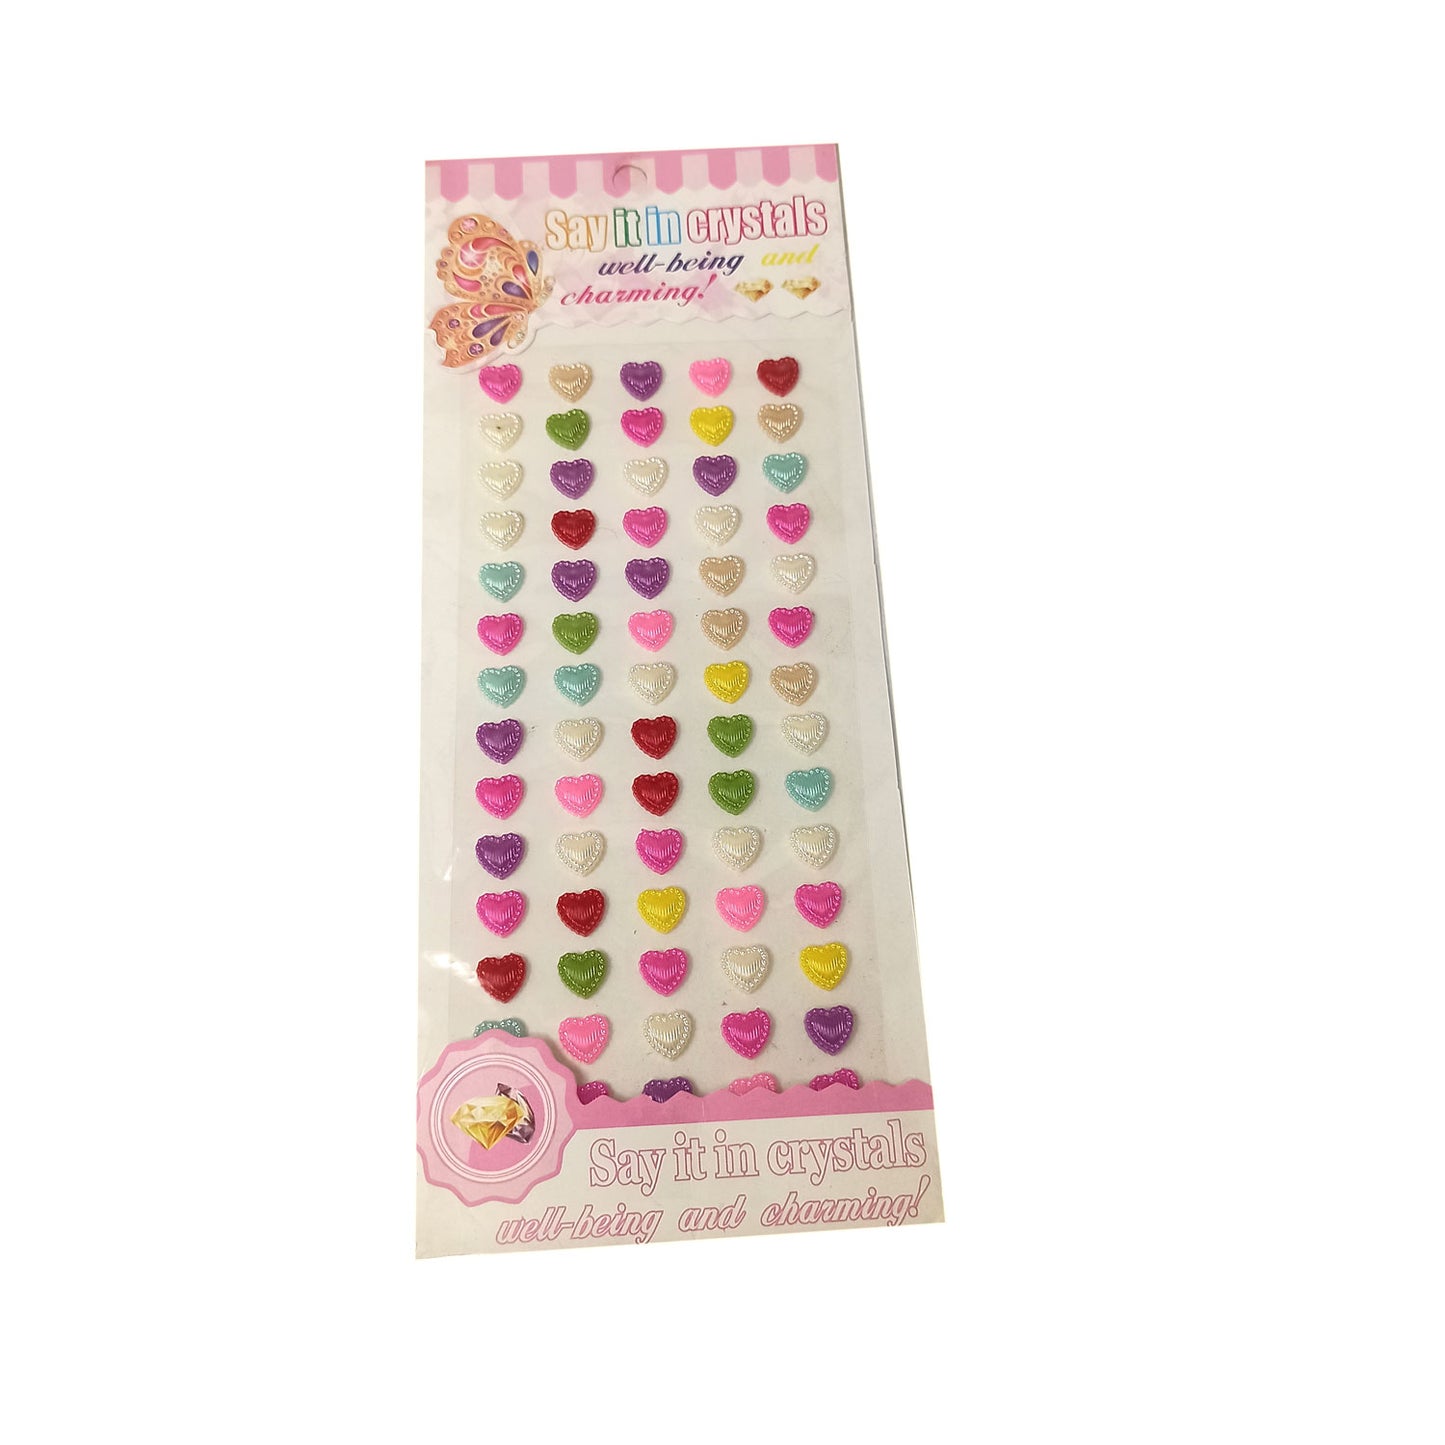 10 mm Half Heart Shaped Beads Sticker (Pack of 1 sheets, DC-17)